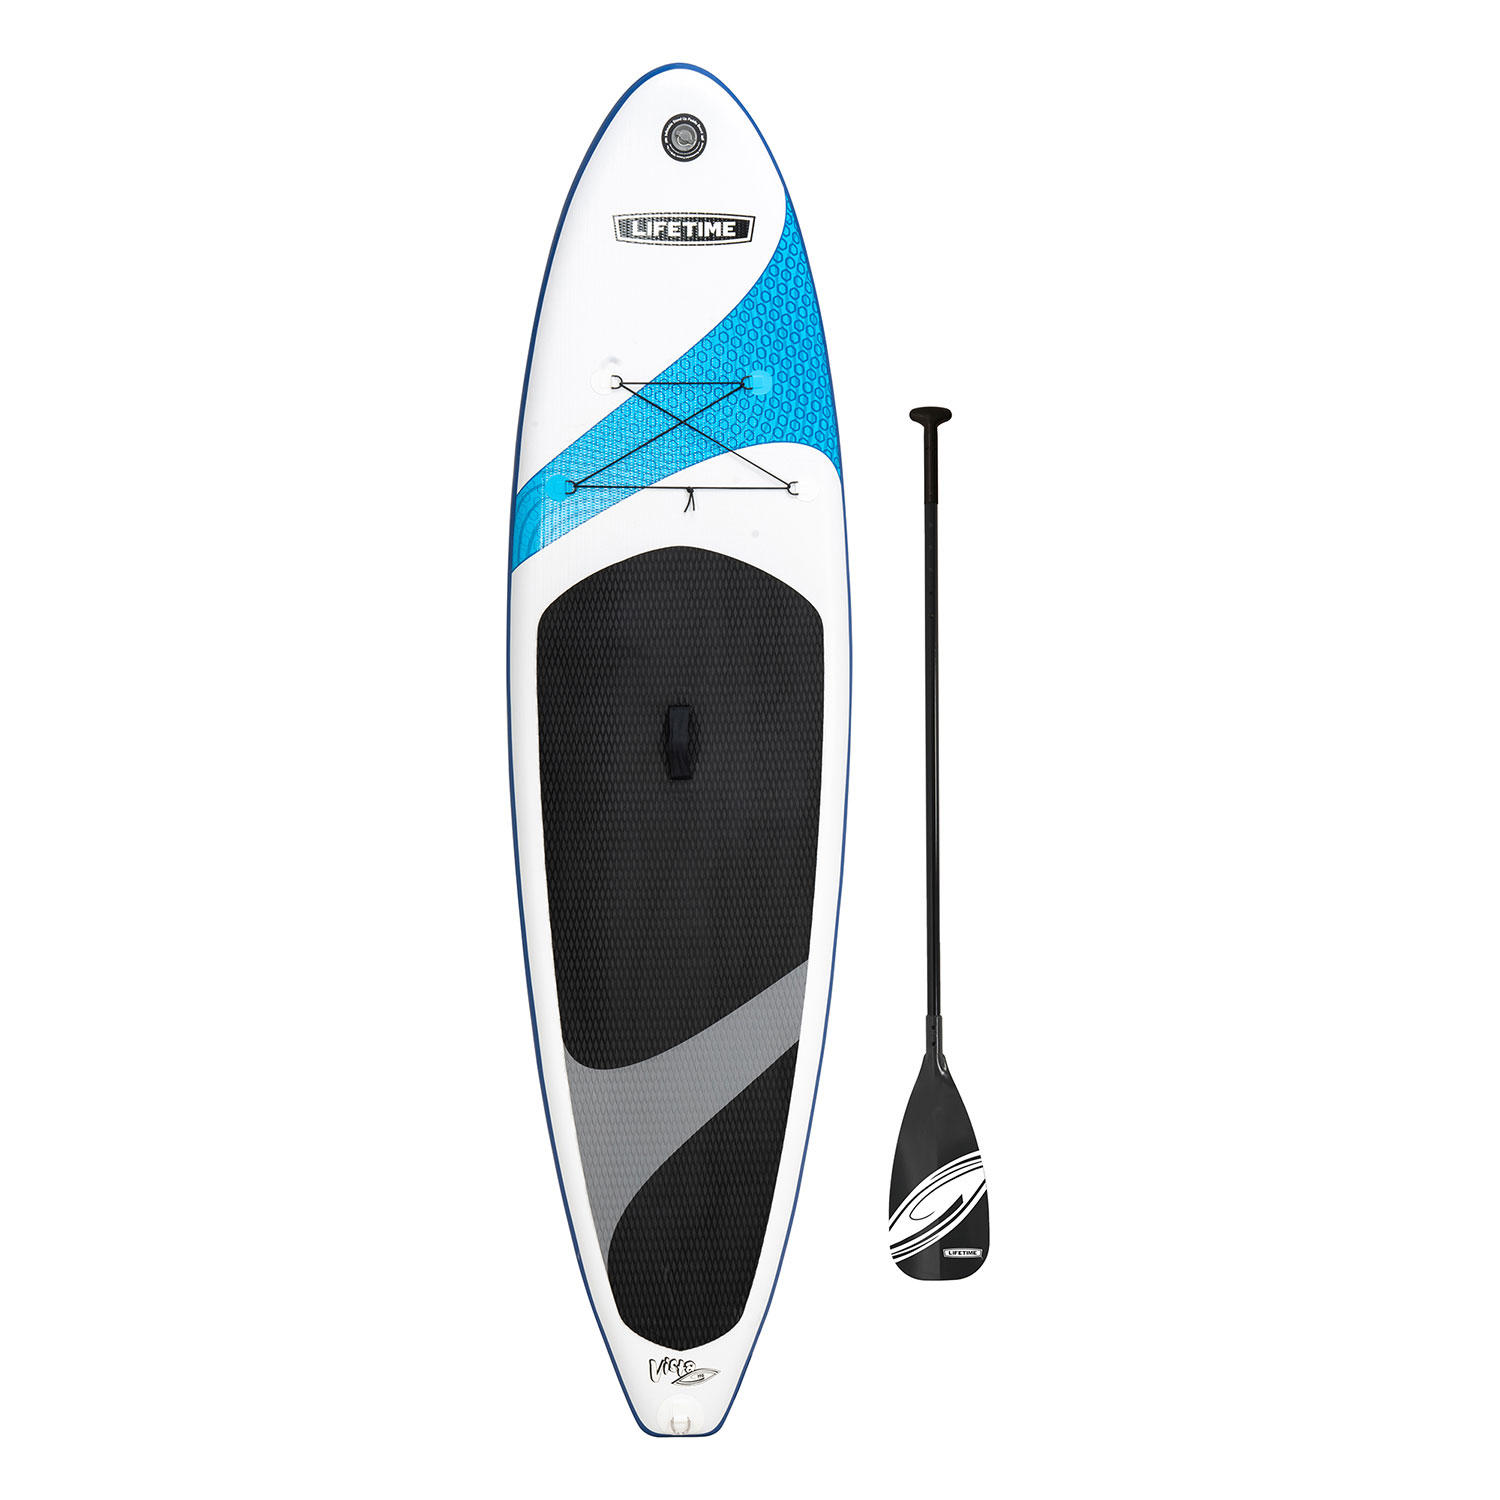 Lifetime Vista 110 (90934) 11 Feet Inflatable Stand-Up Paddleboard